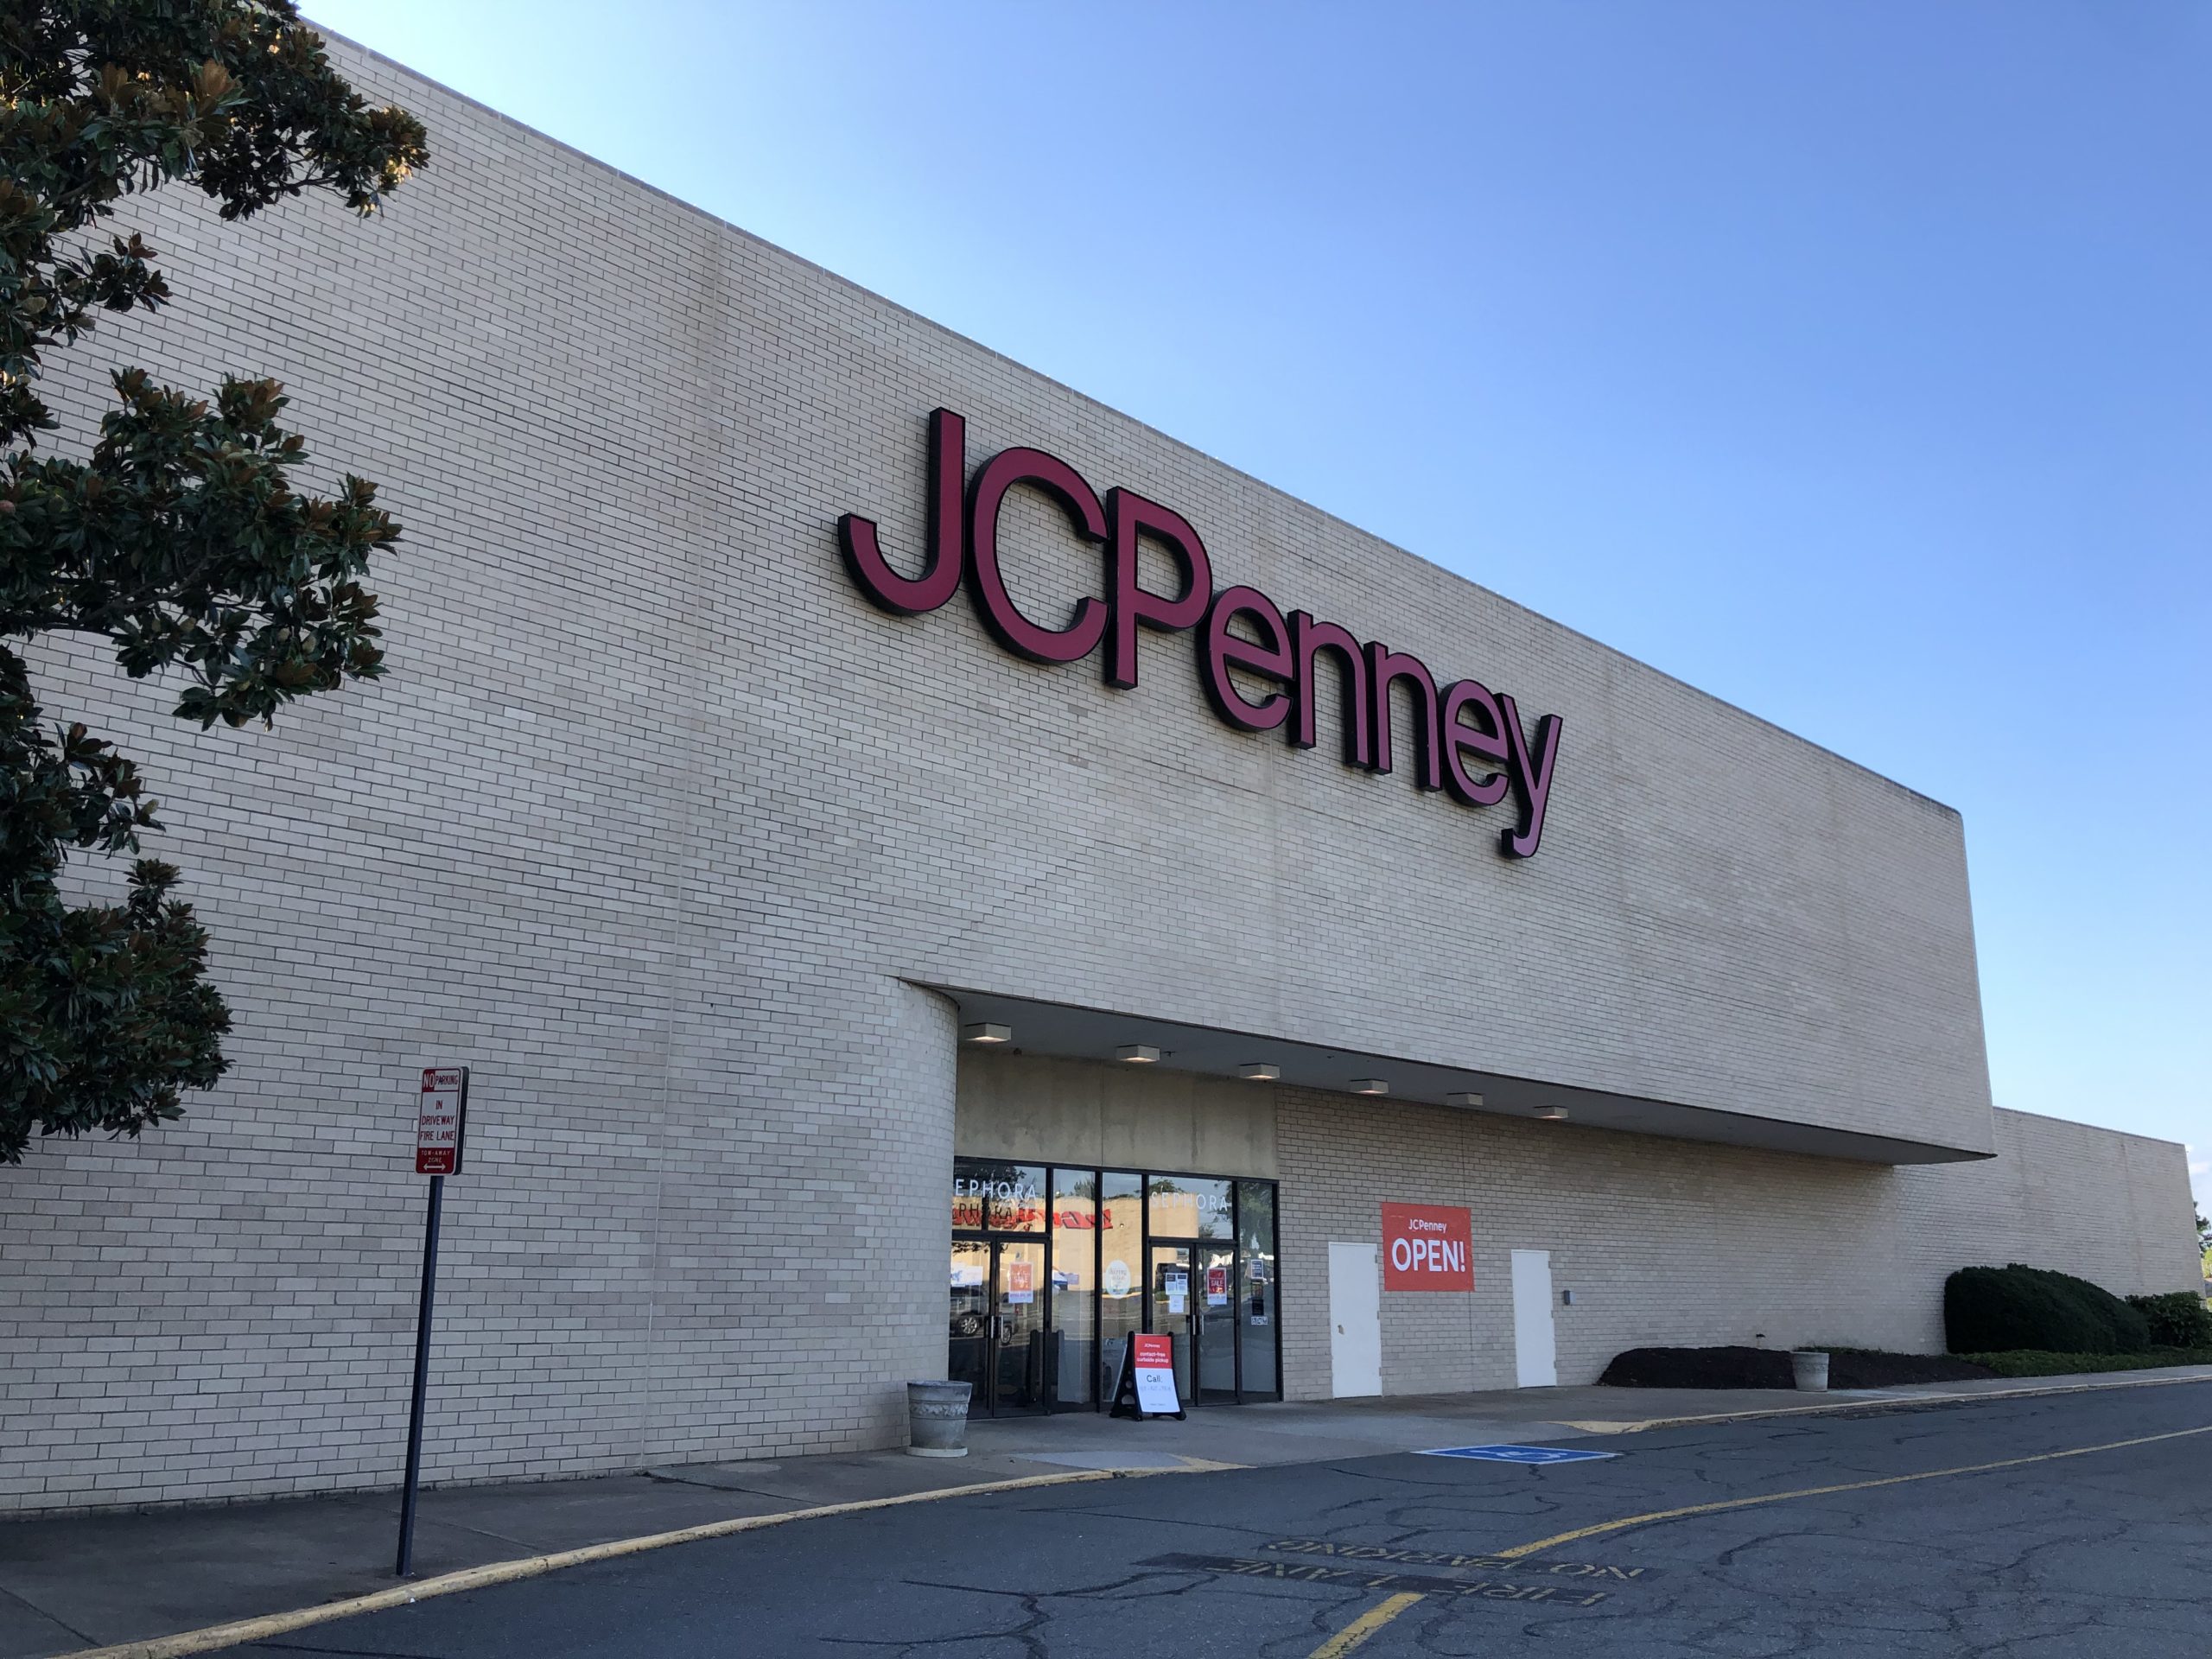 JCPenney to shutter Regency Square store; Rebkee, Thalhimer to buy building  - Richmond BizSense